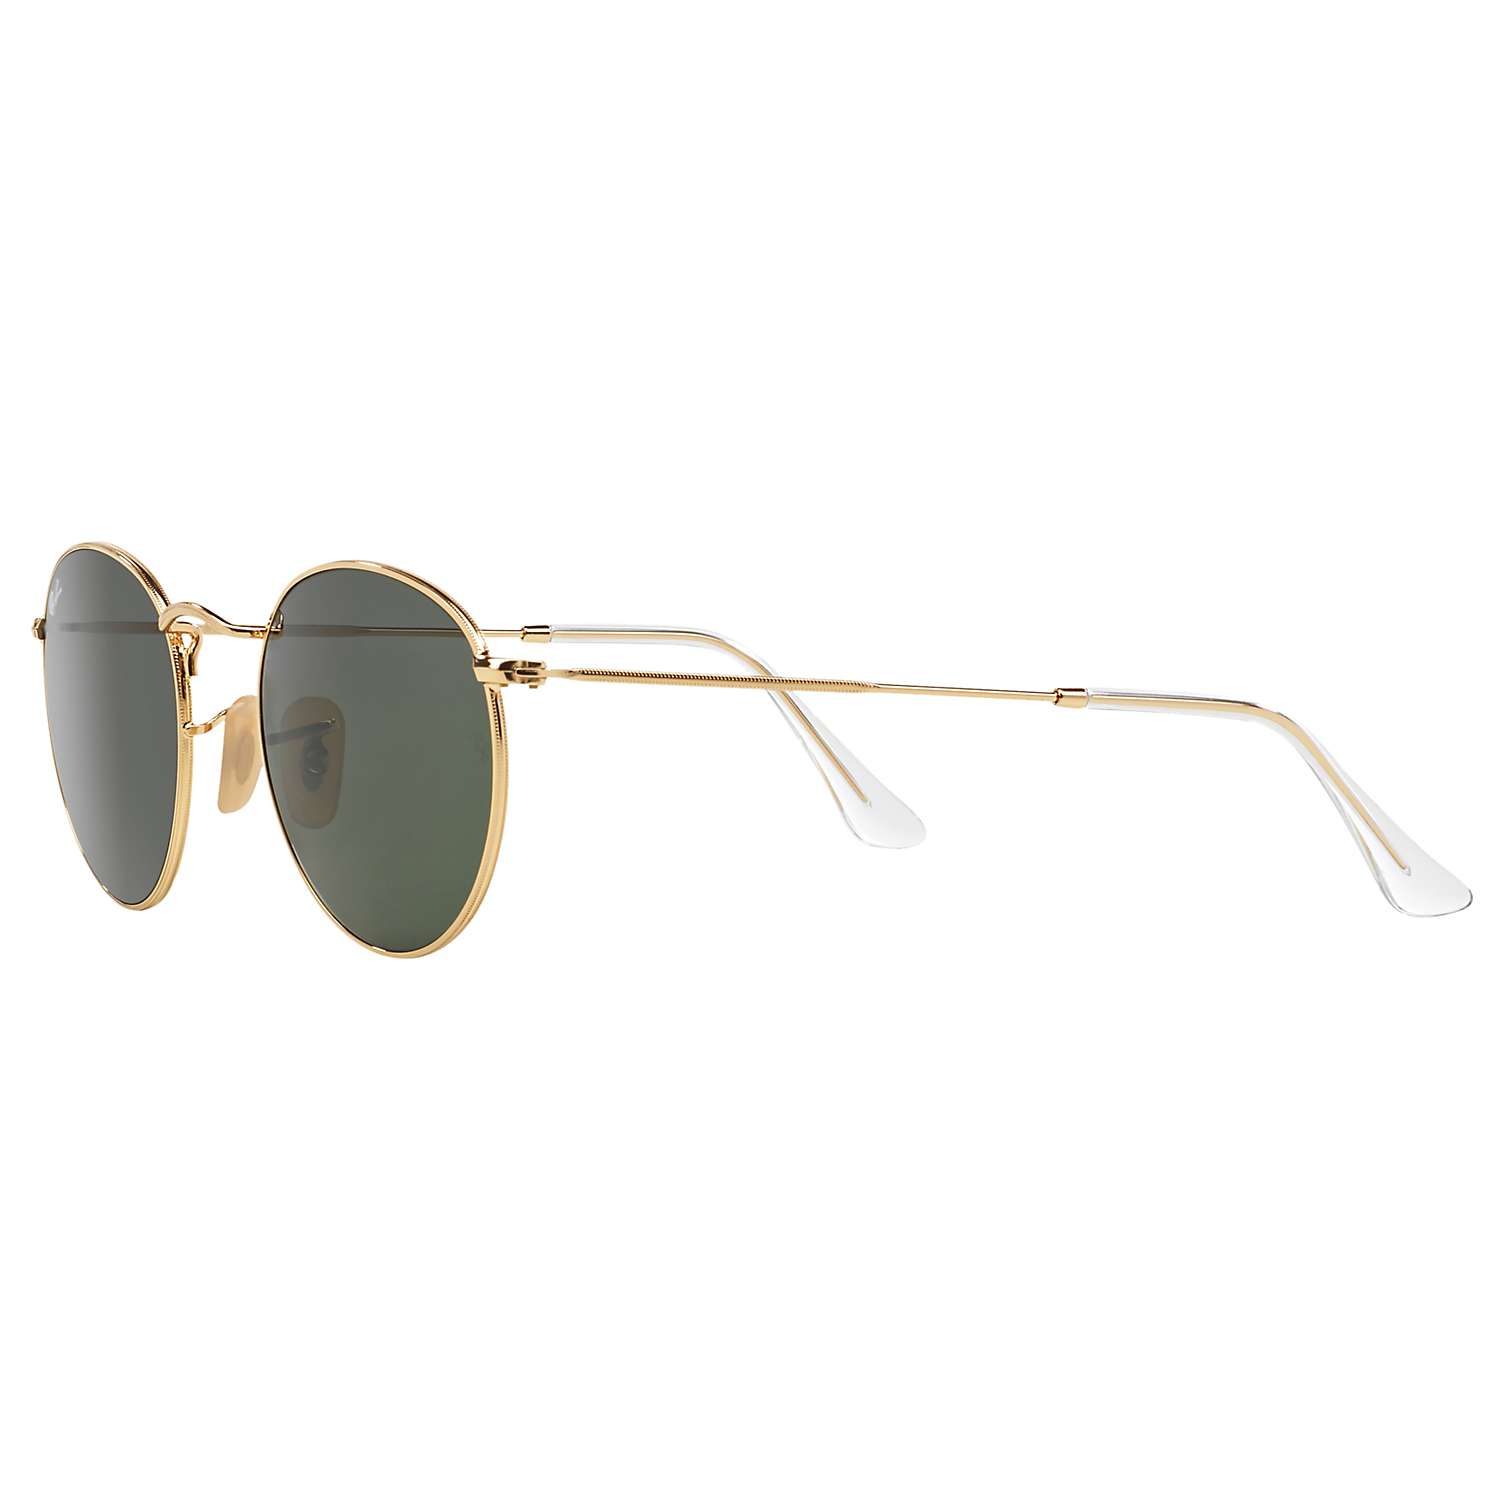 Buy Ray-Ban RB3447 Round Metal Sunglasses Online at johnlewis.com